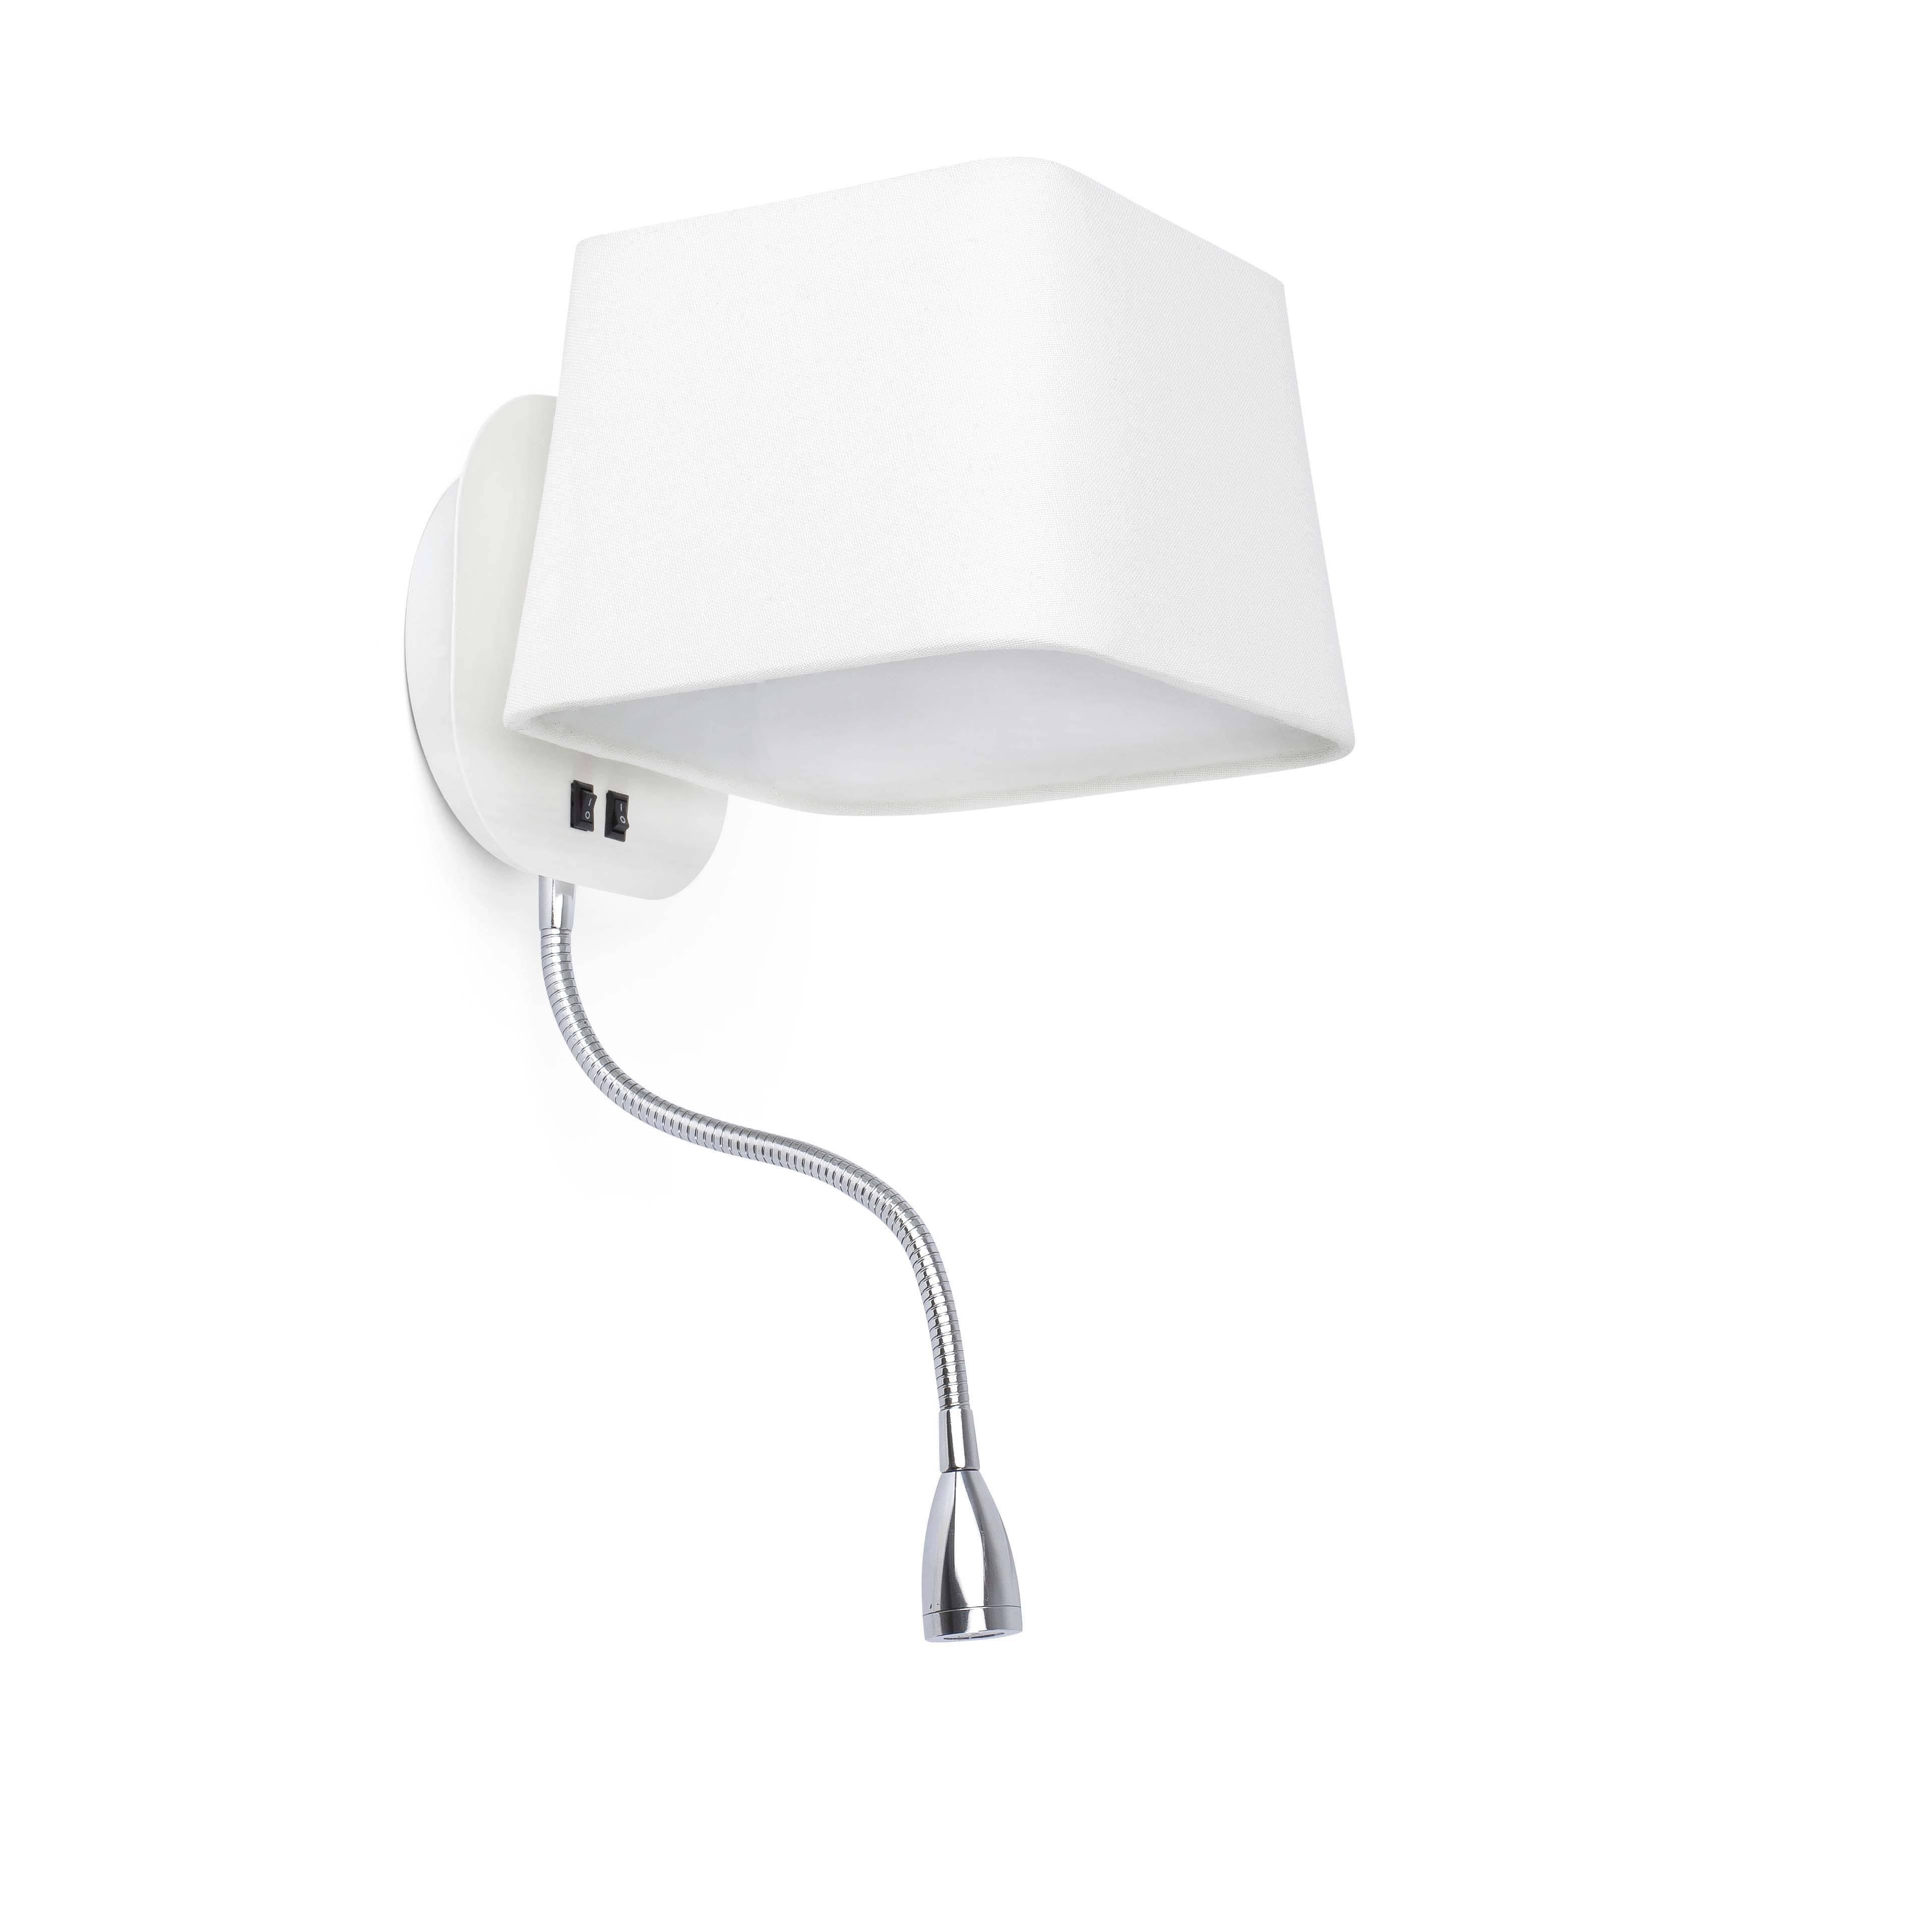 Sweet 1 Light Indoor Wall Light White with Reading Lamp E27 - image 1